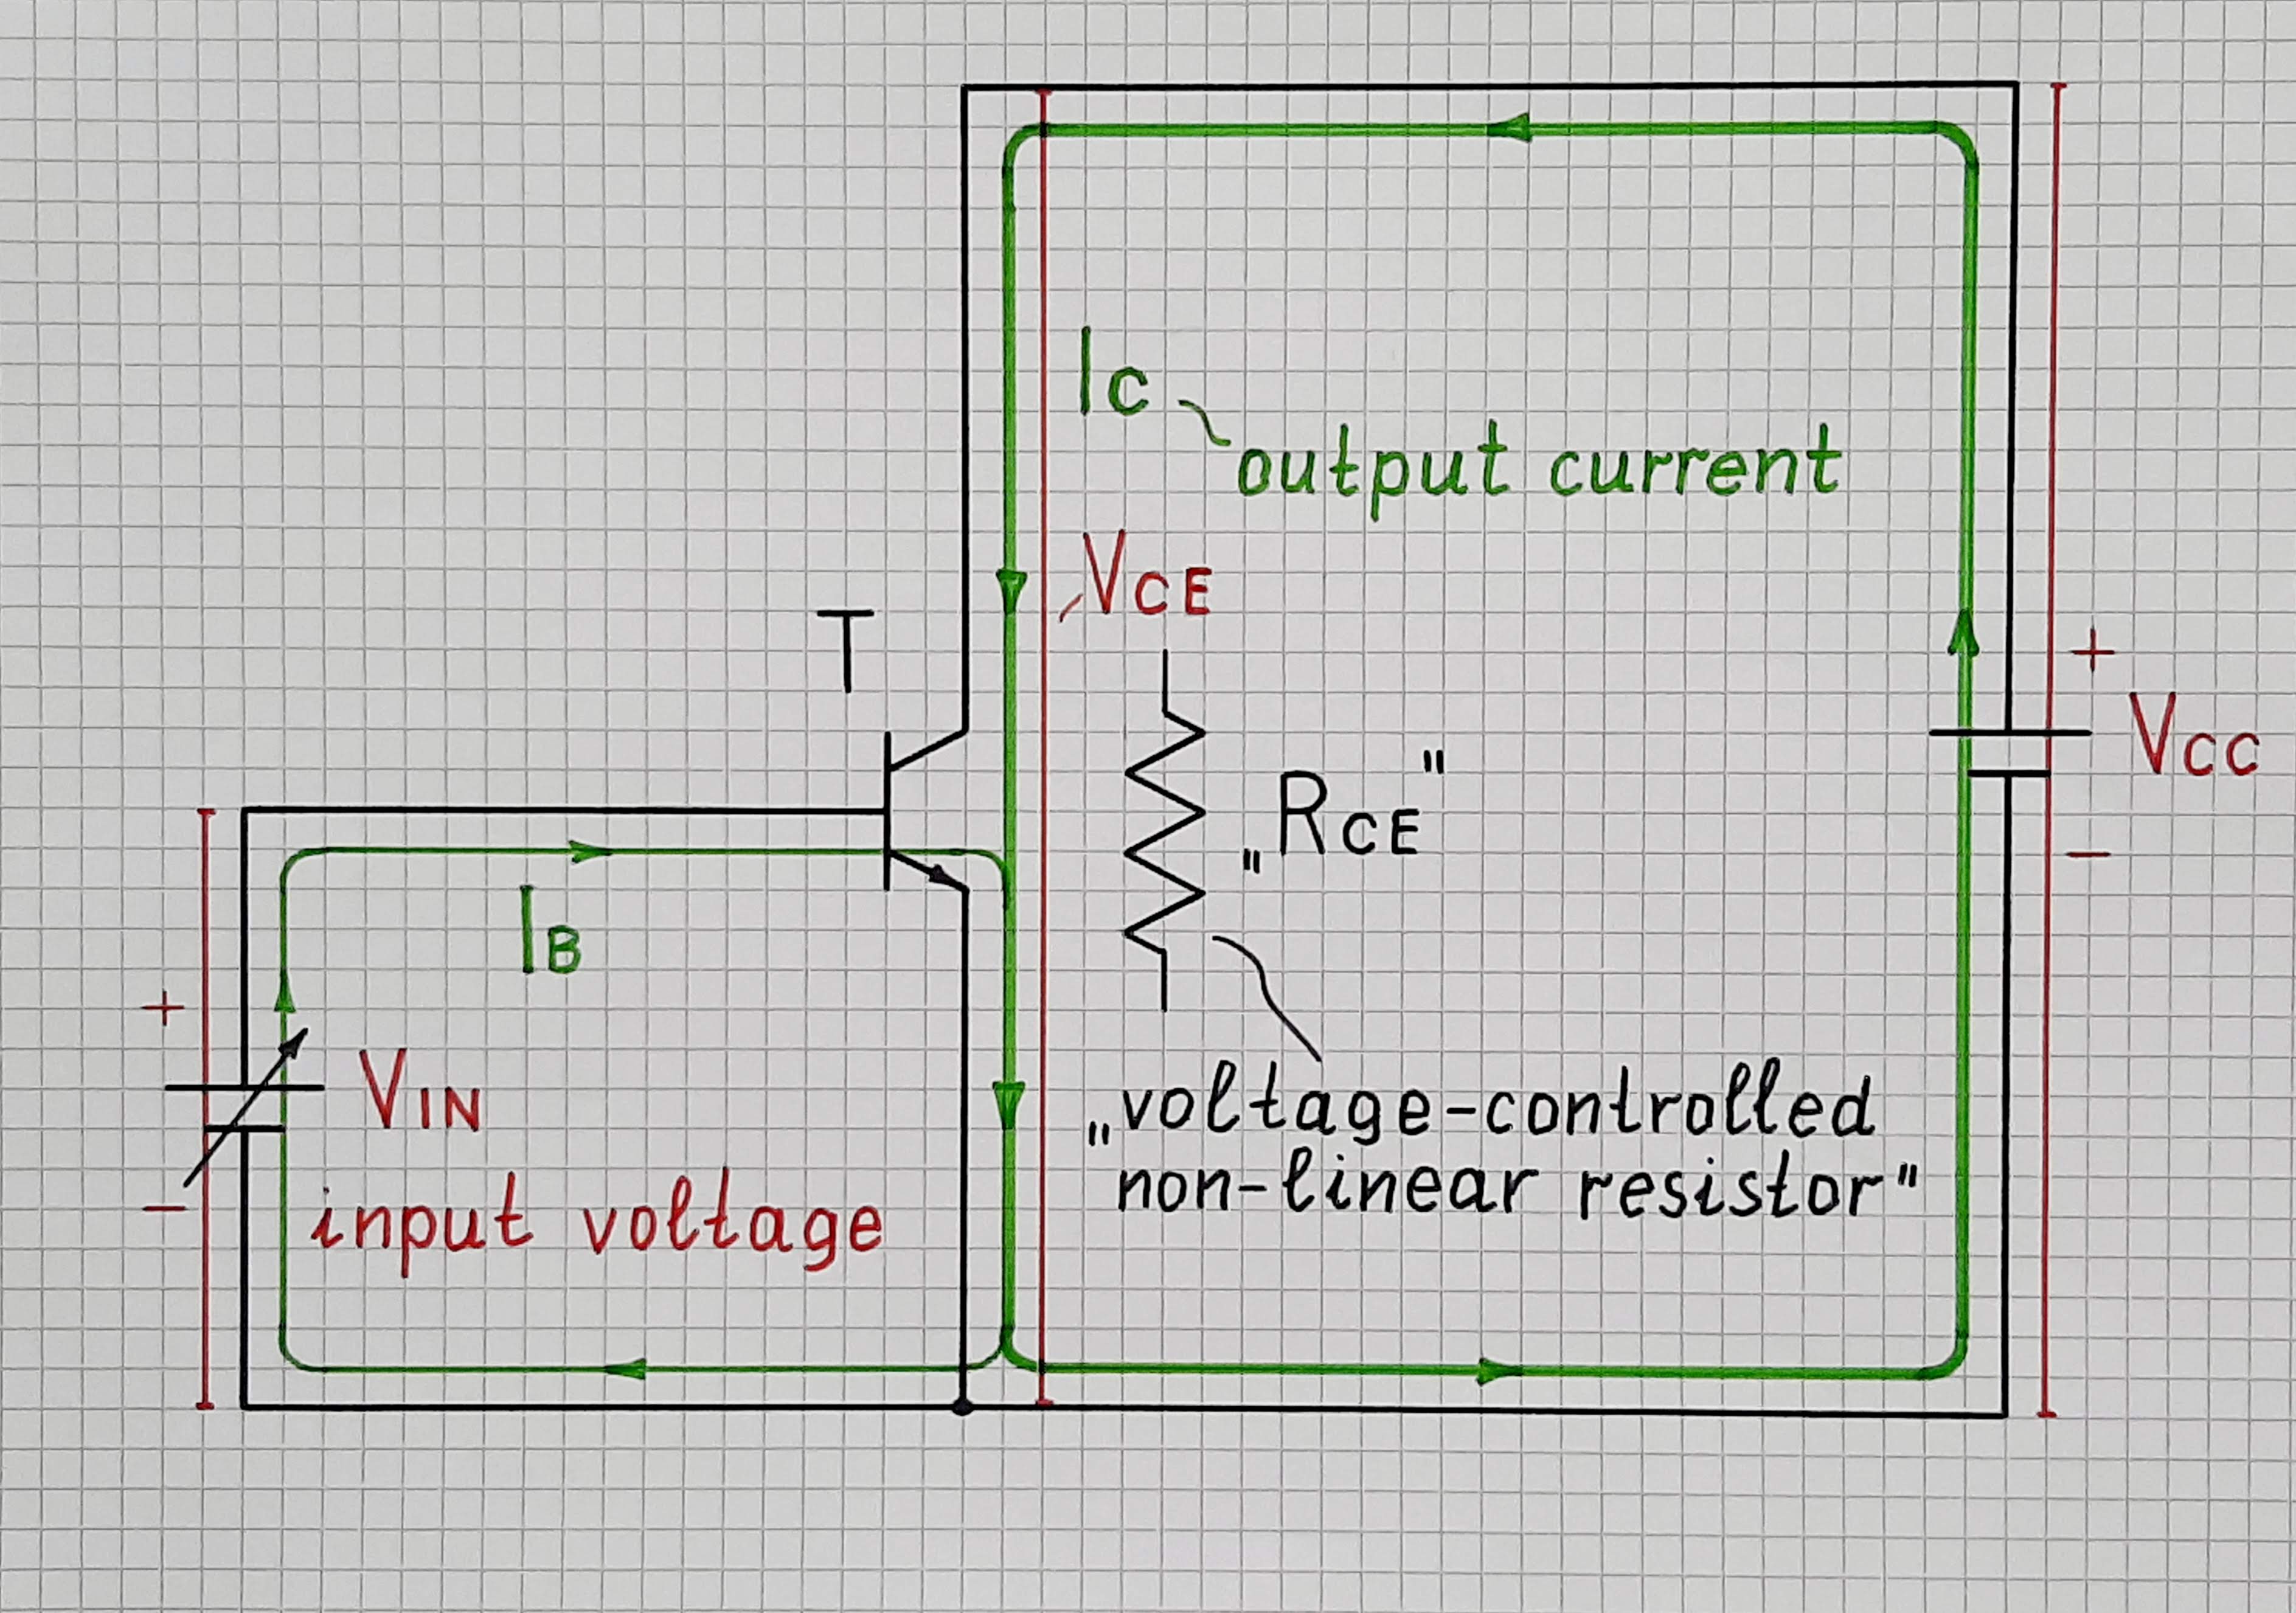 Transistor amplifier with a current output